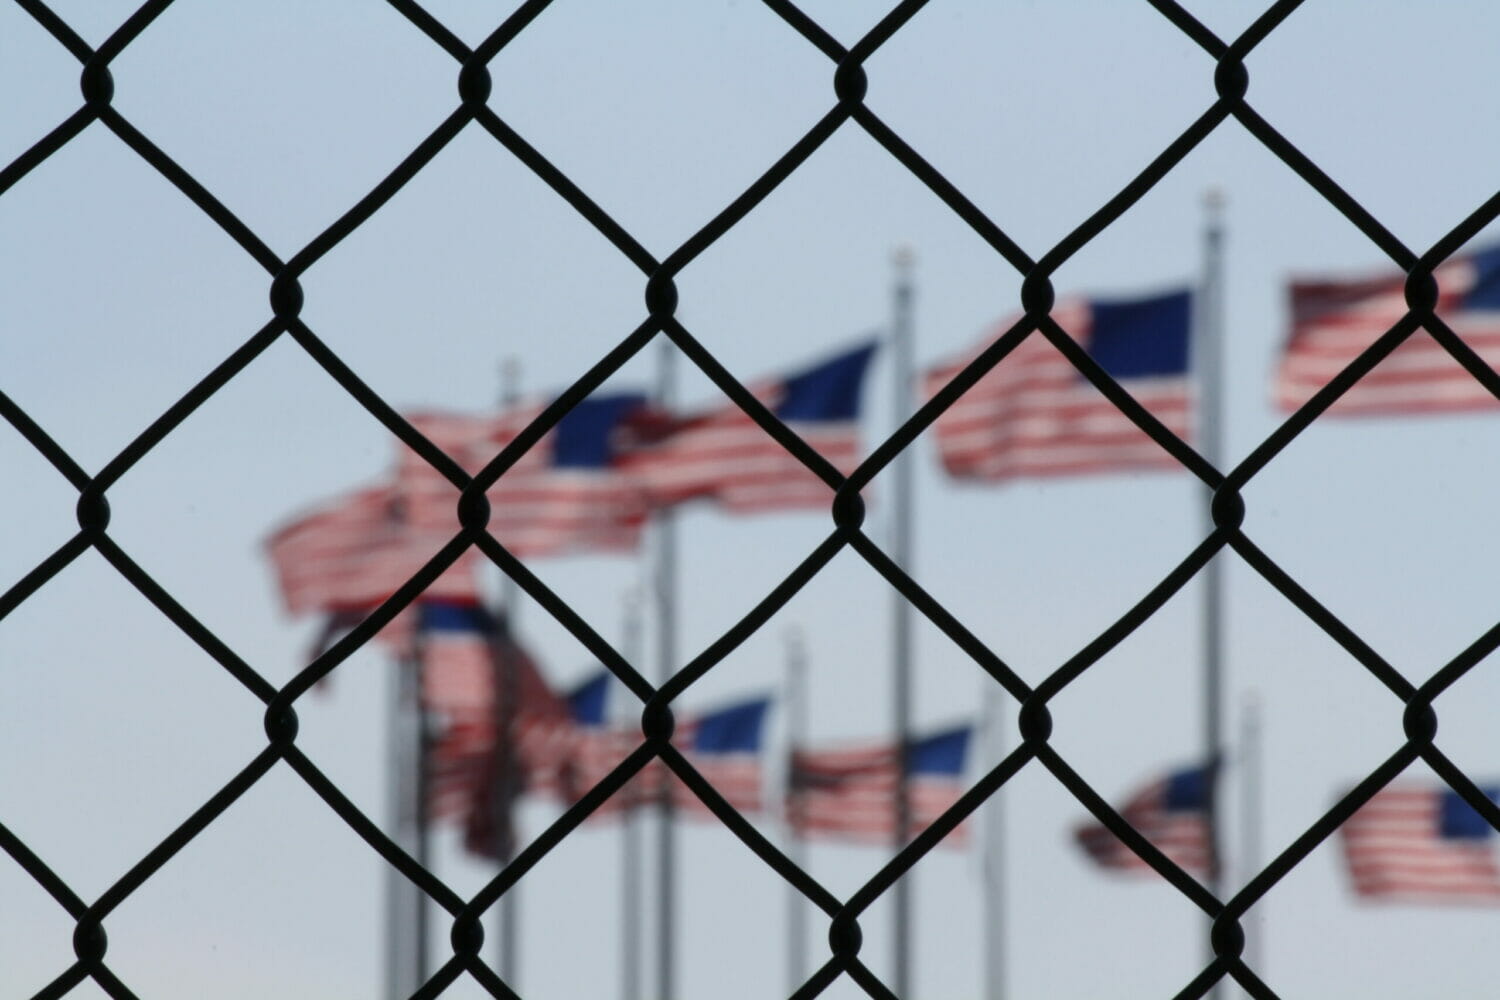 US flags behind a fence